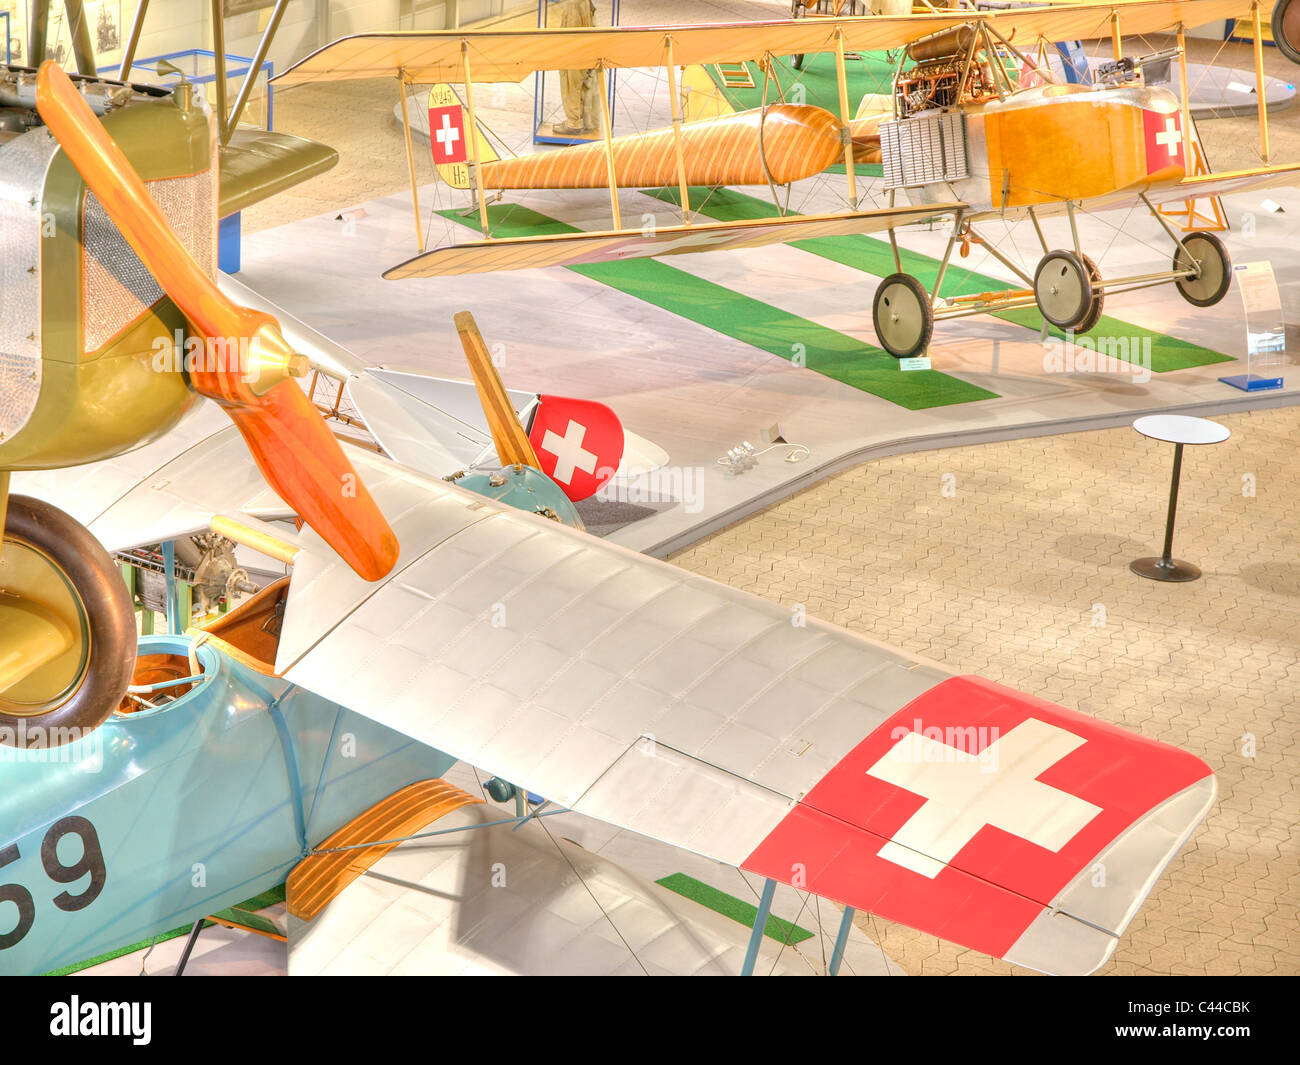 Airplanes, airman's museum, village Duben, museum, canton Zurich, Switzerland, military aircraft, old-timers, aviation Stock Photo